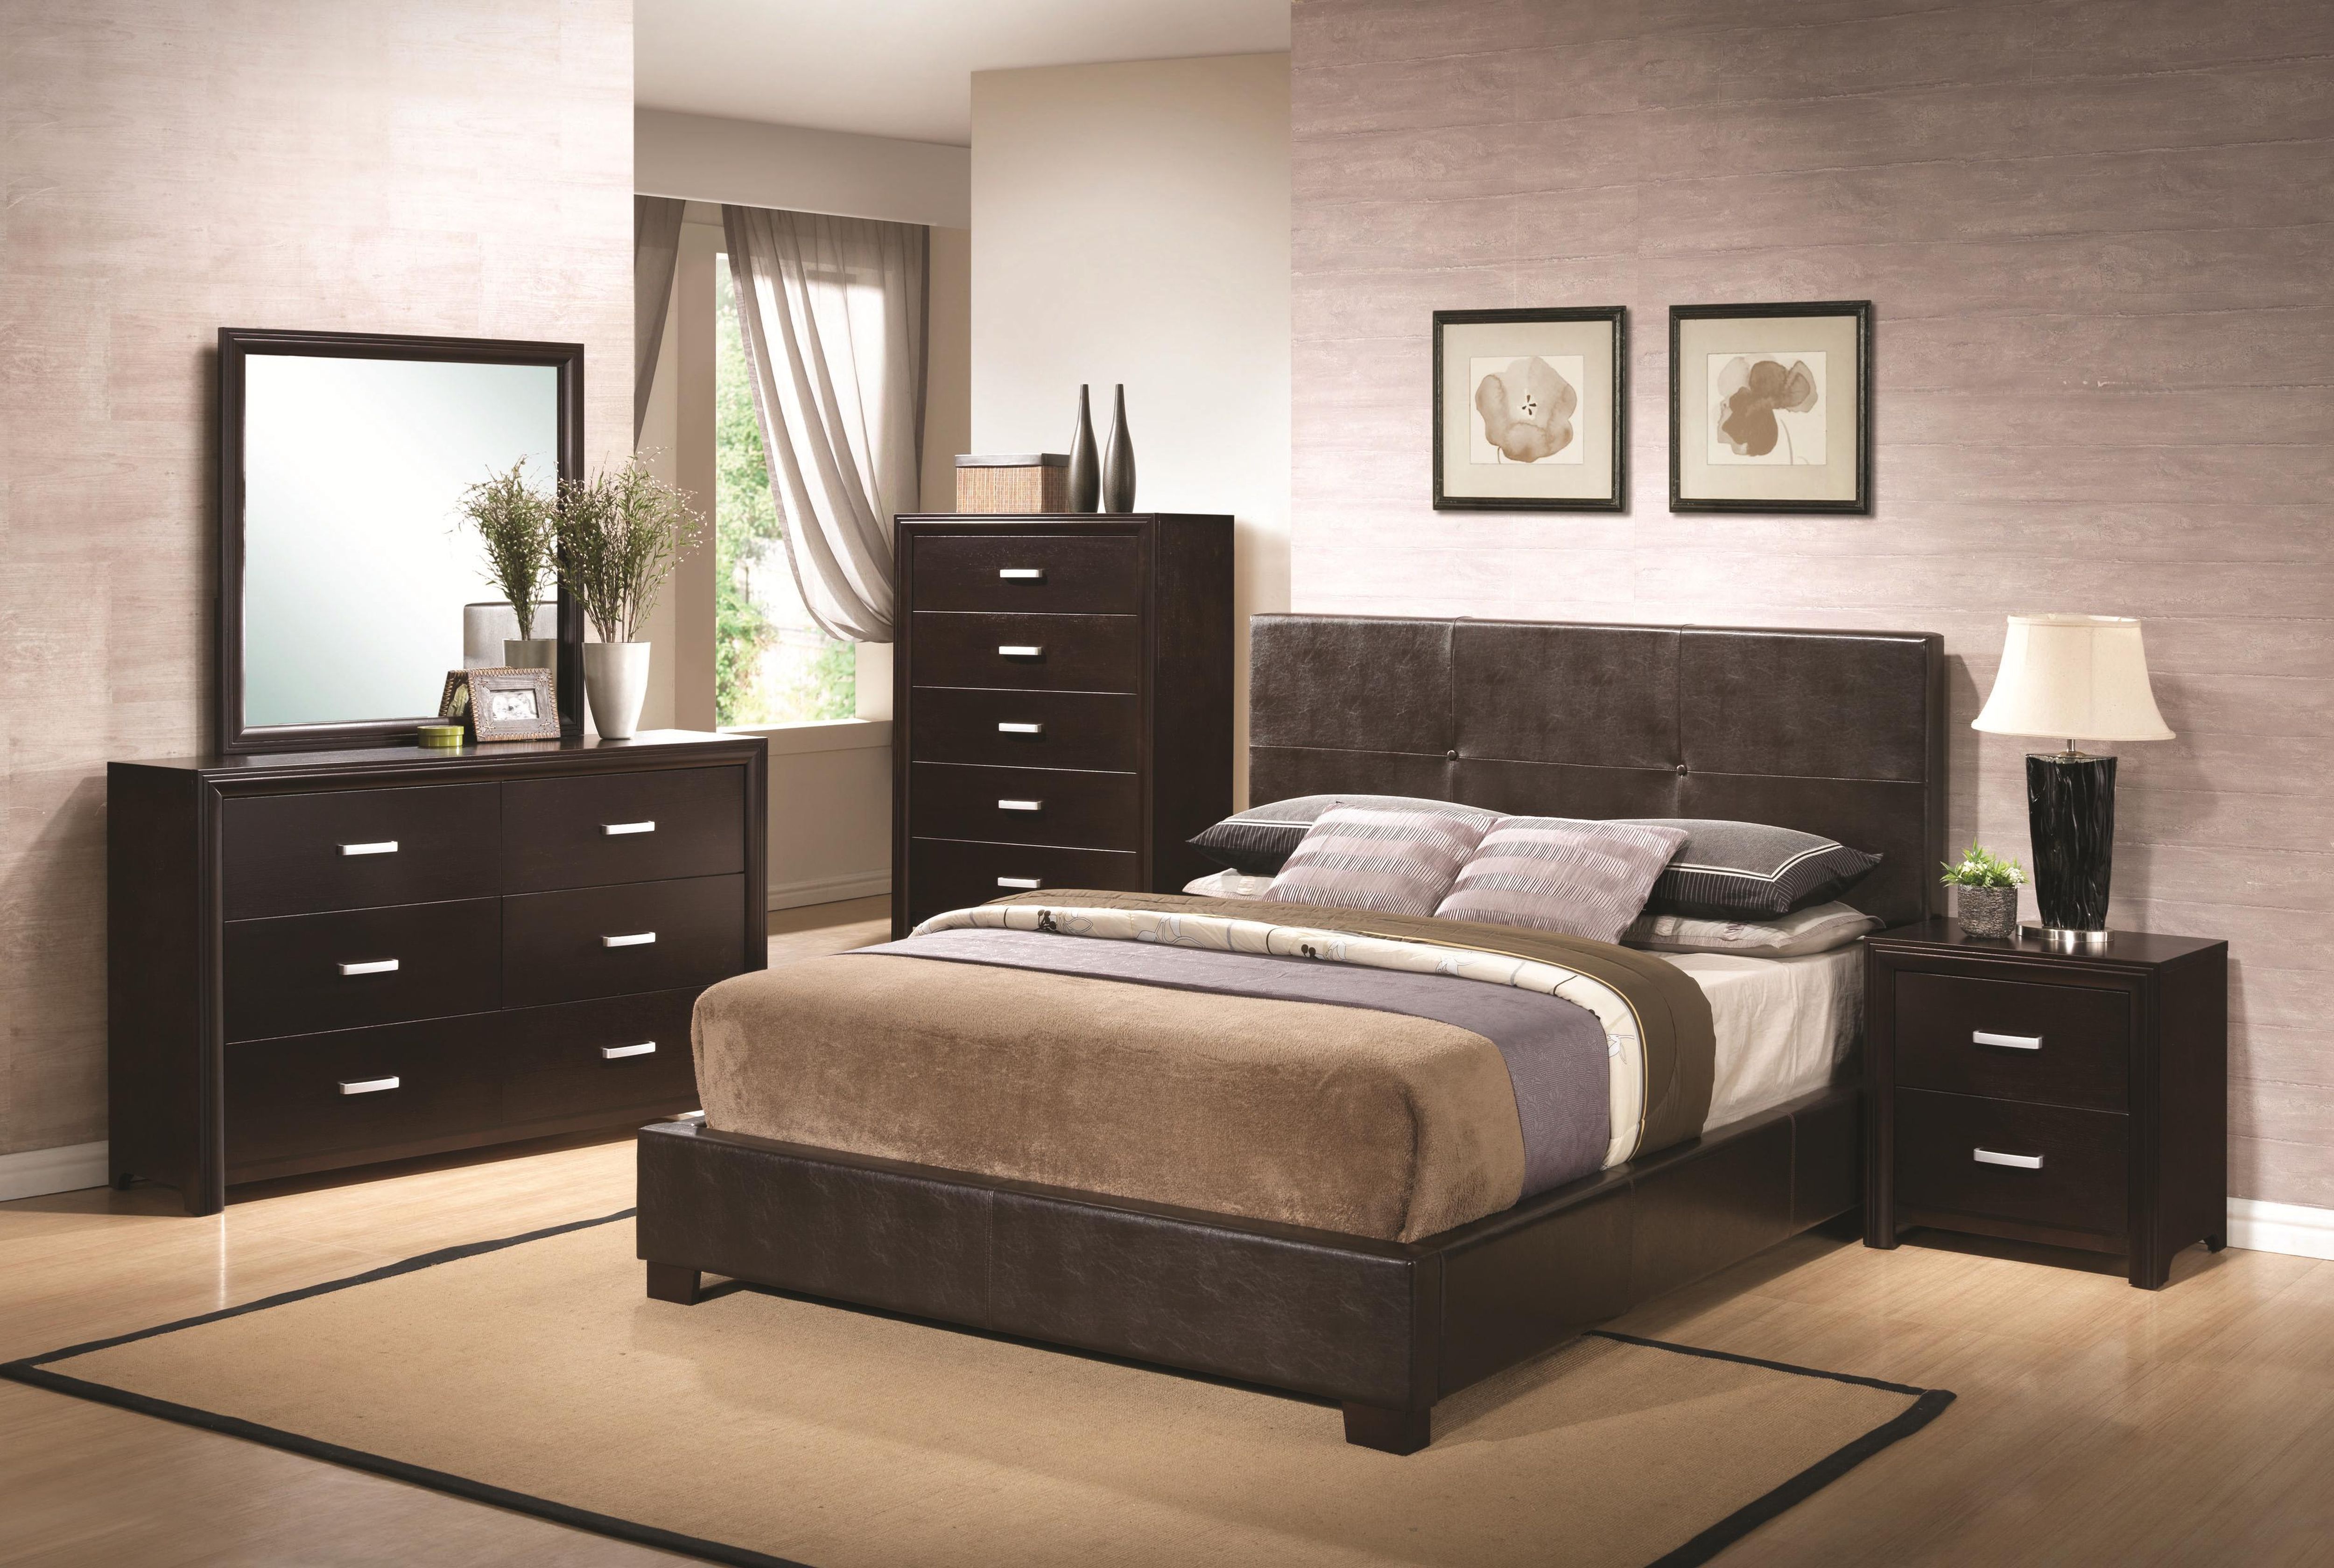 bedroom decorating ideas with ikea furniture